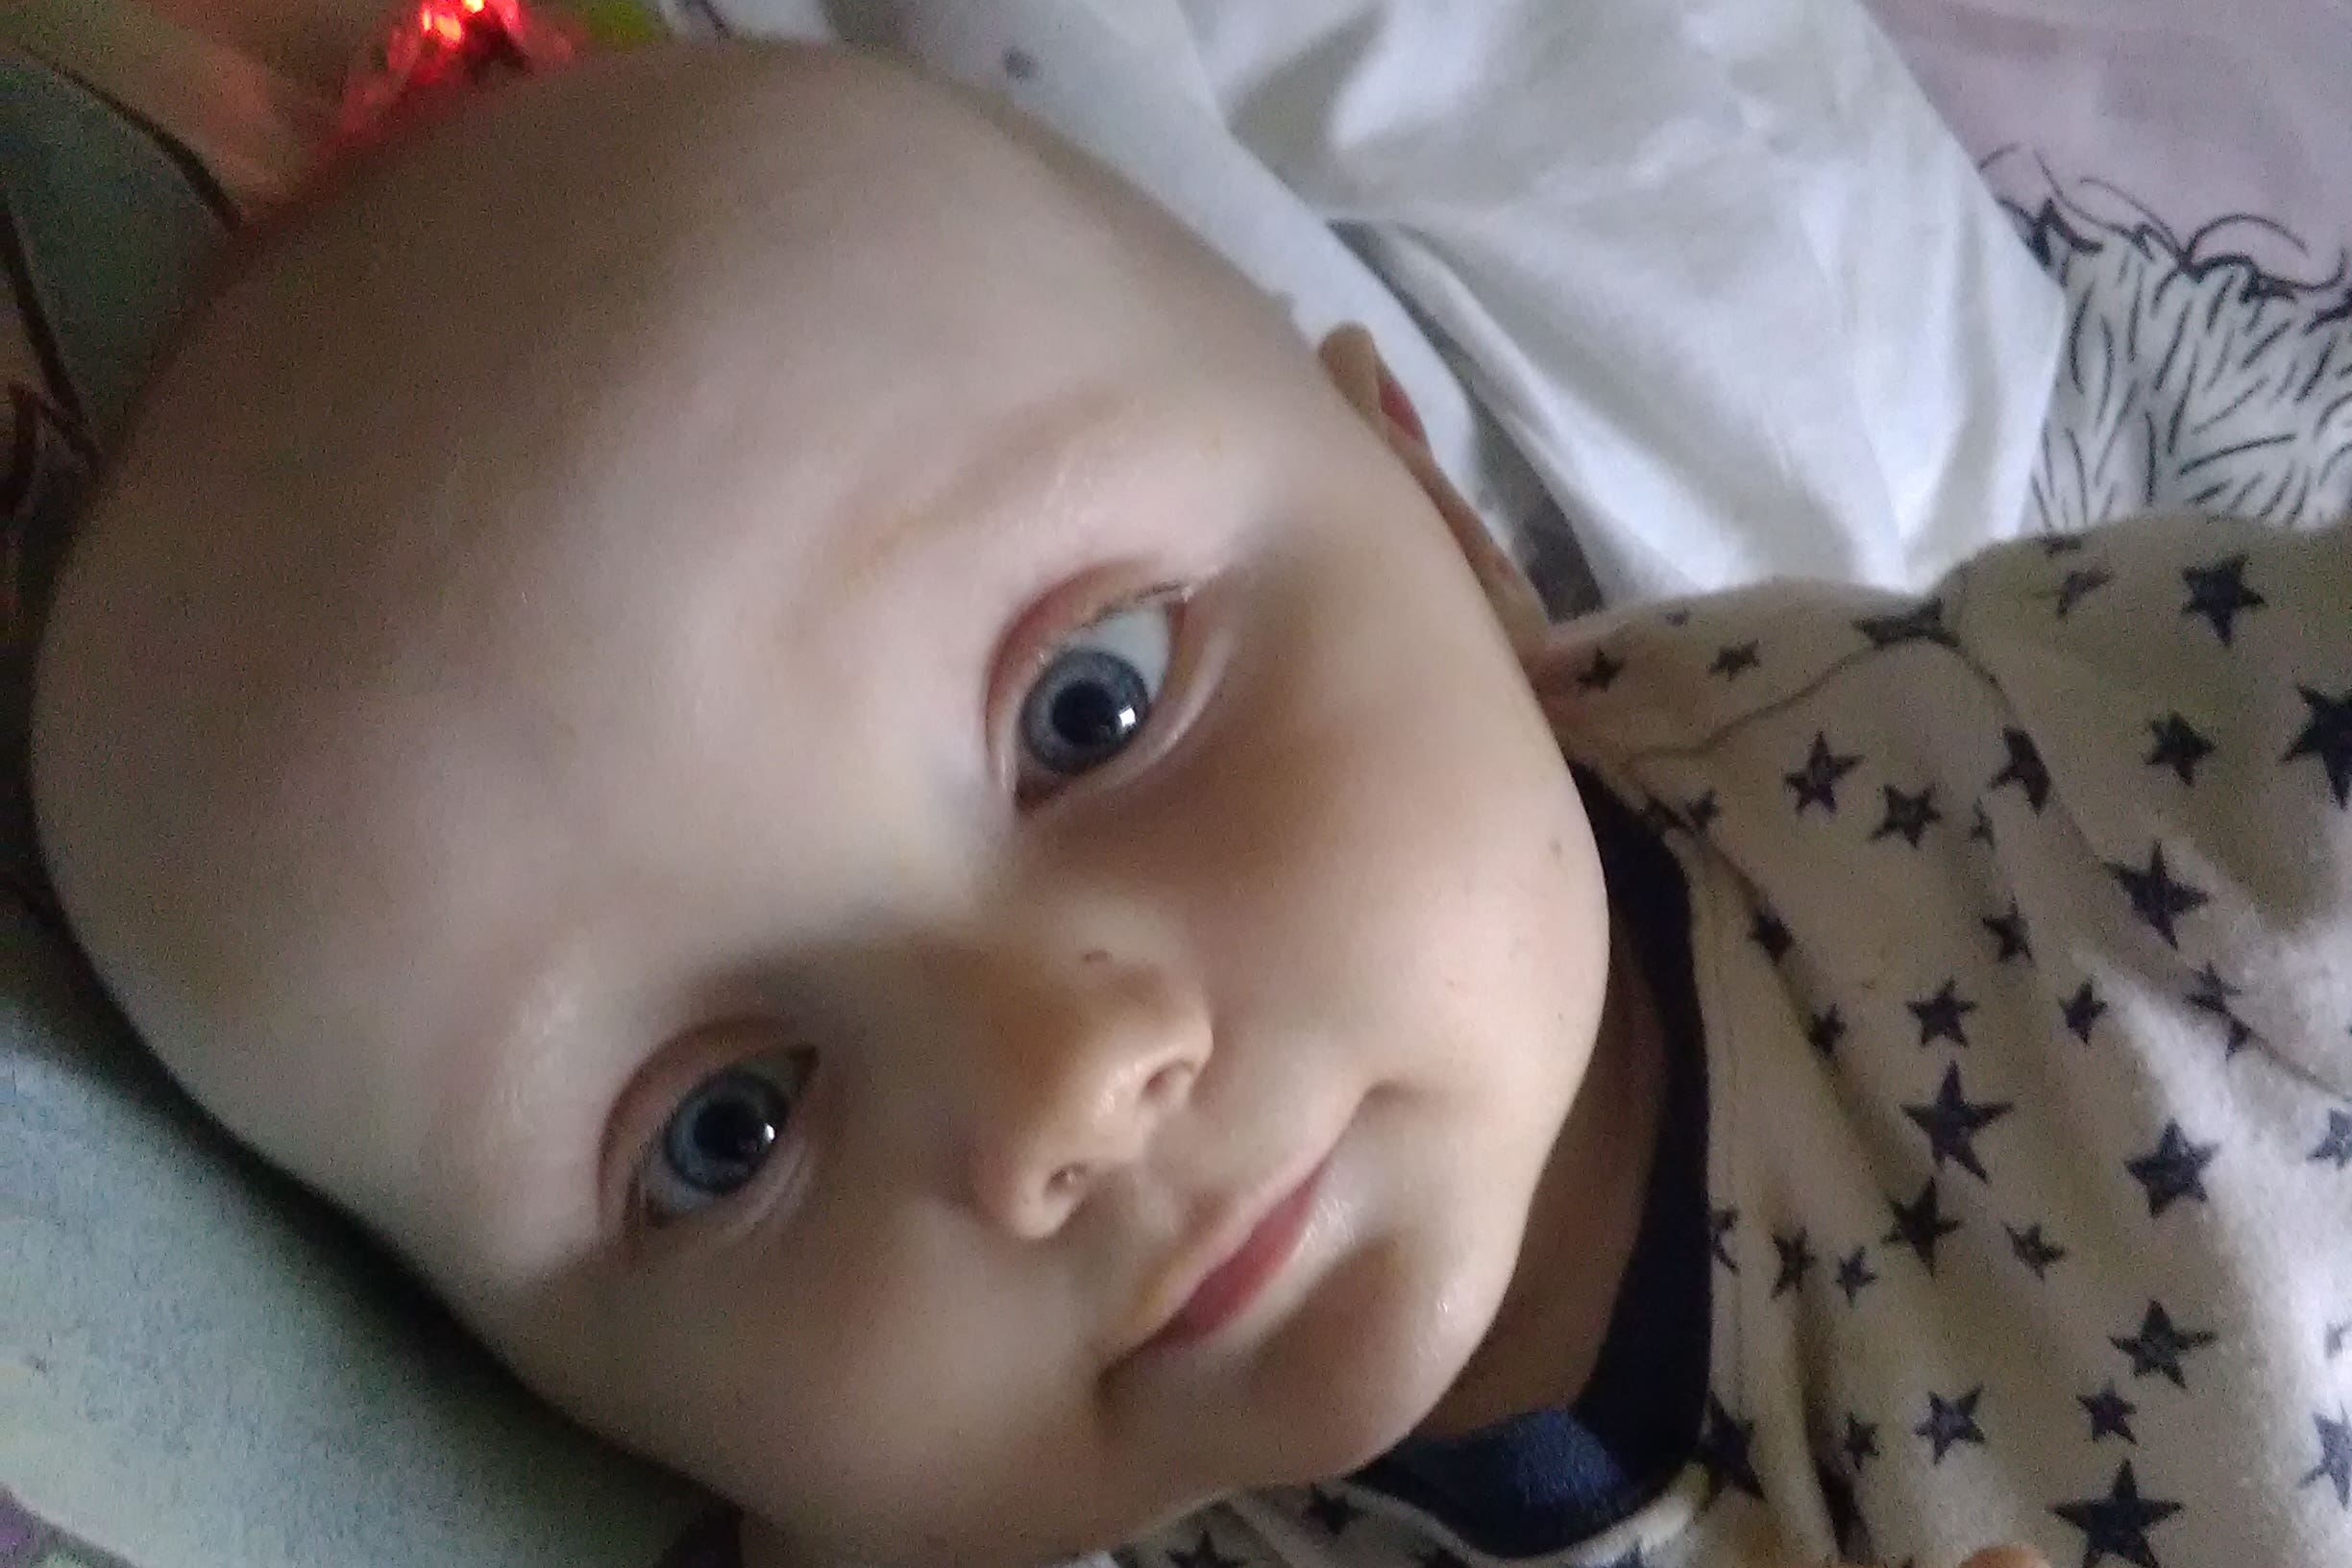 Ten-month-old Finley Boden was murdered just weeks after he was returned to his parents’ care in 2020 (Derbyshire Police/PA)